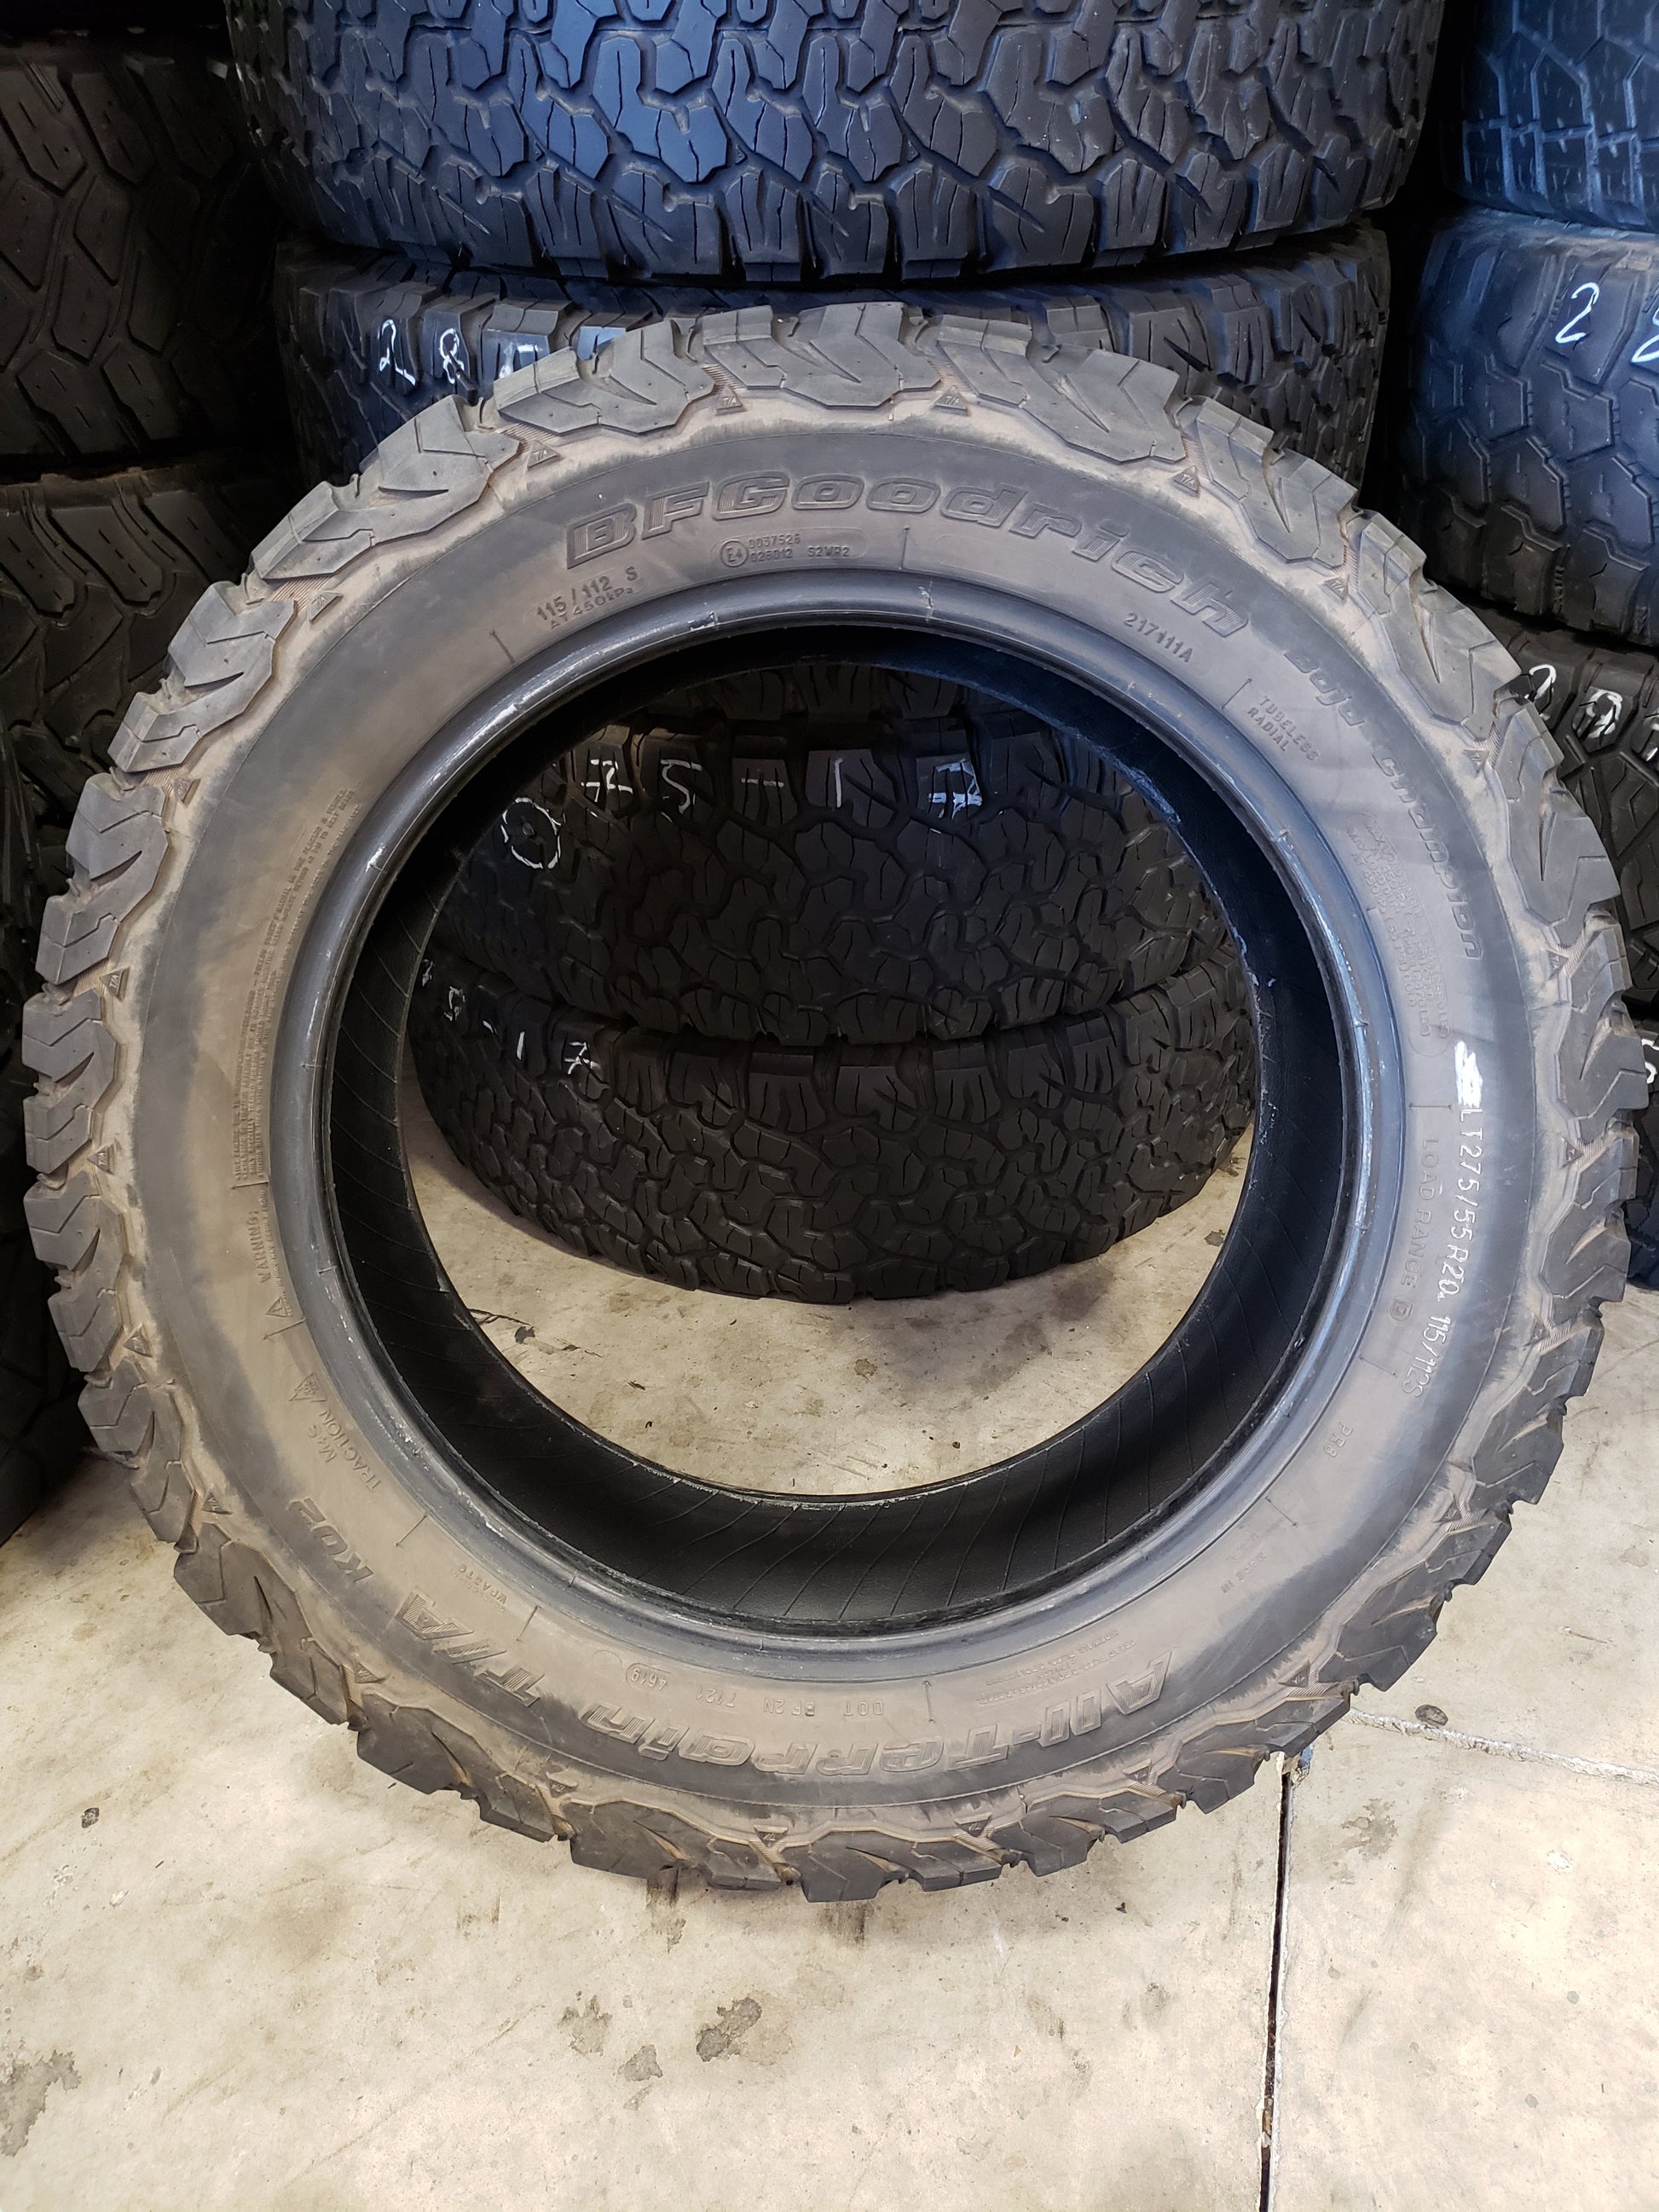 SET OF 2 275/55R20 BFGoodrich All-Terrain T/A K02 115/112 S D - Used Tires